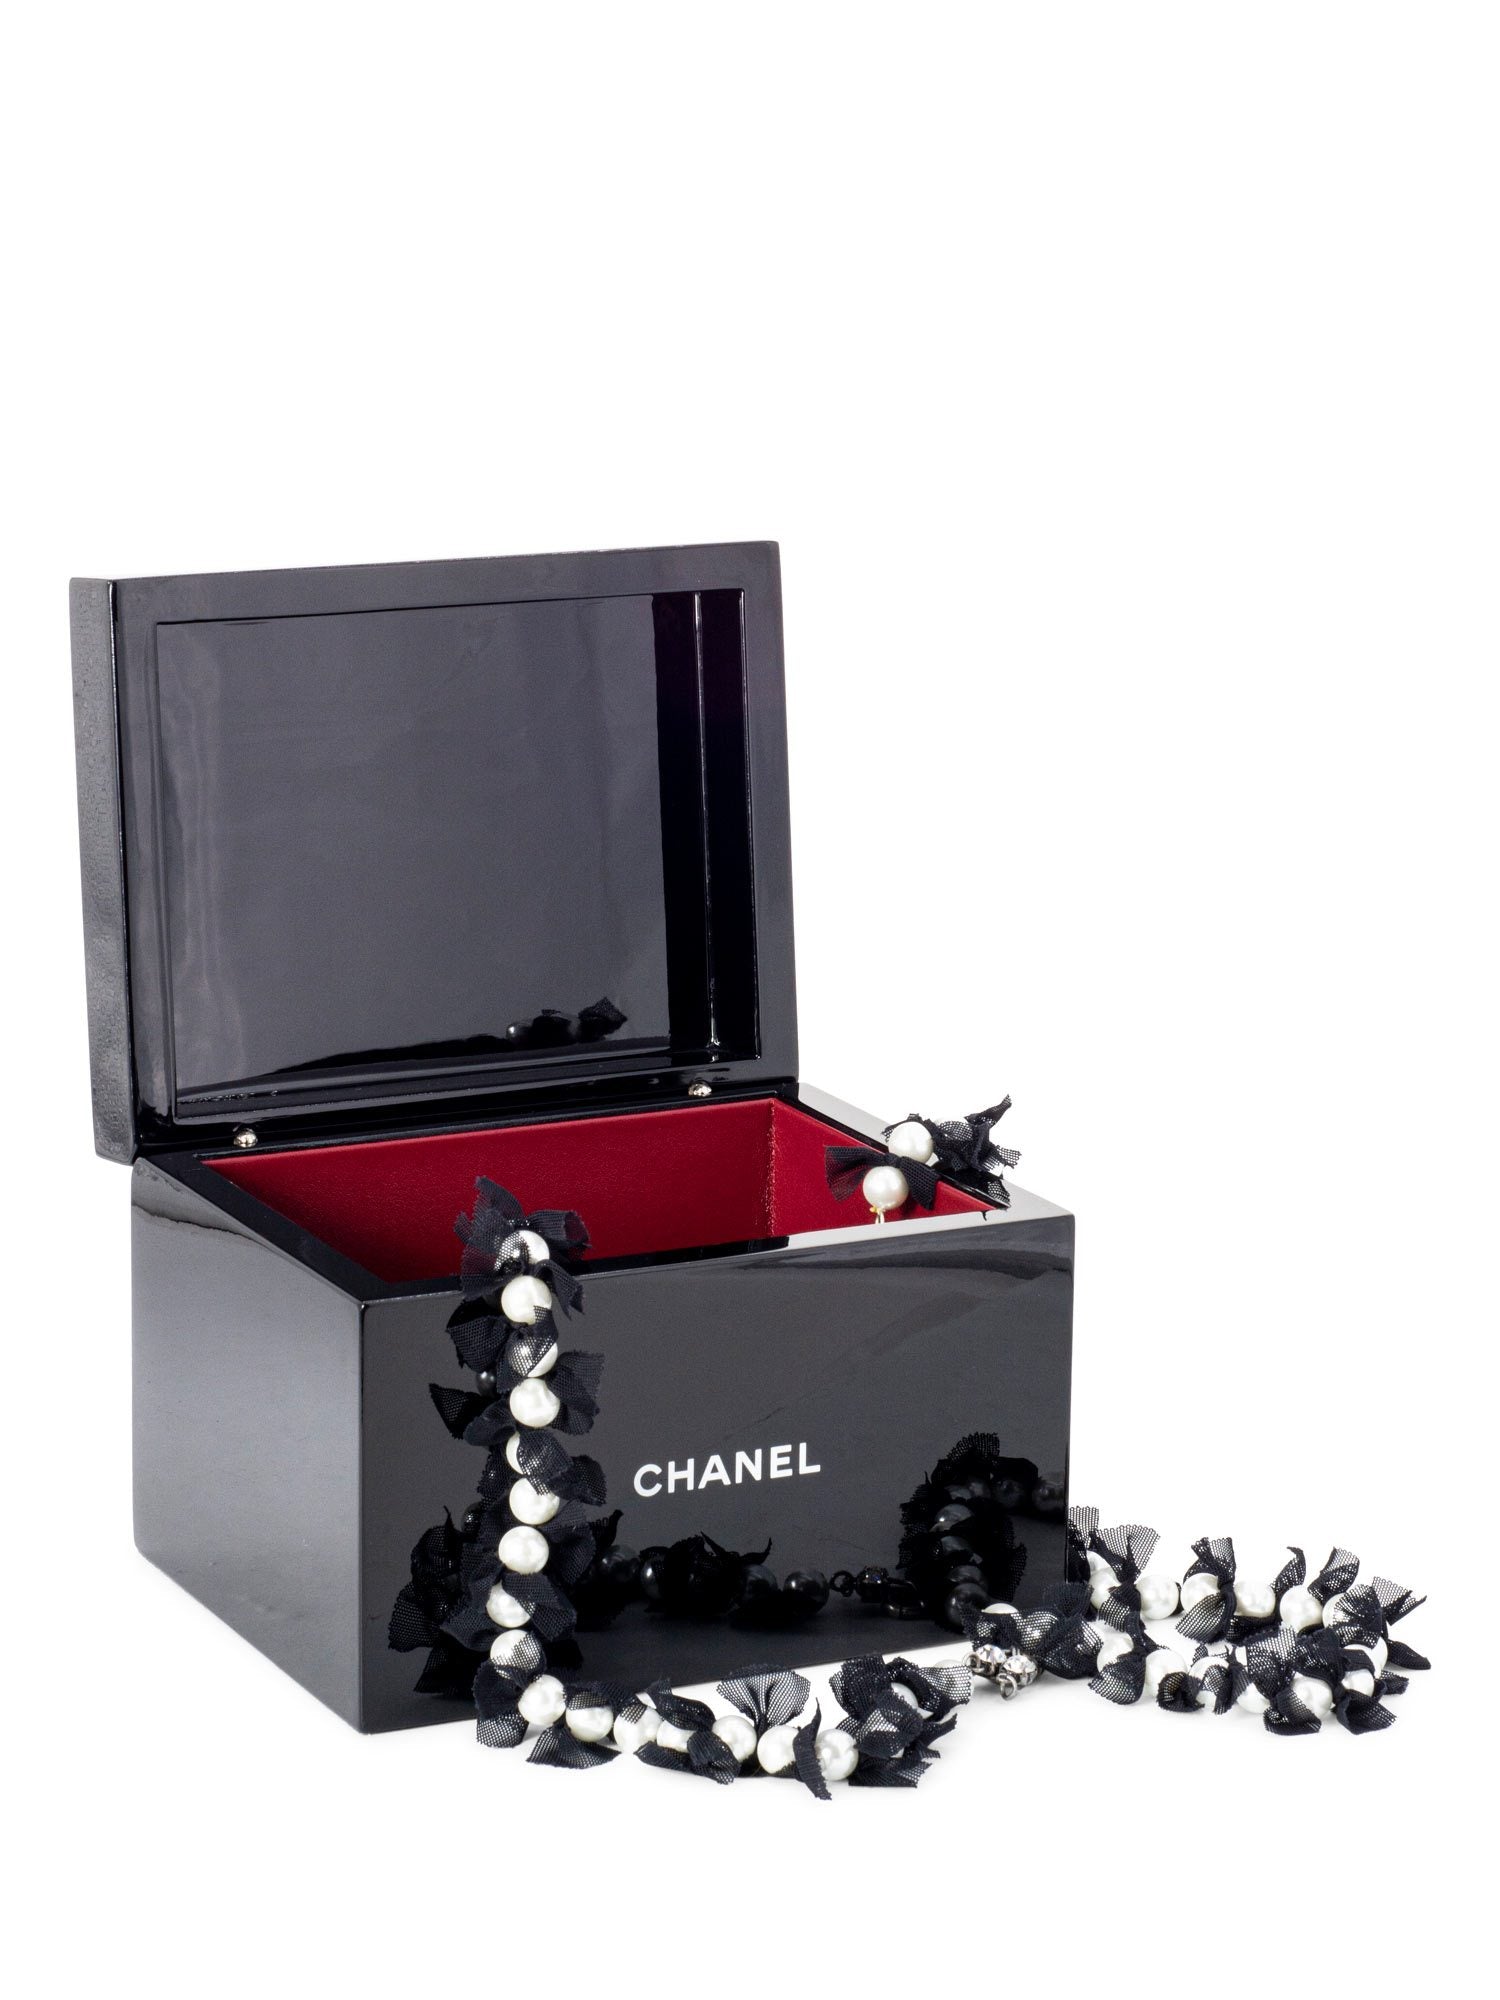 CHANEL Lacquered Beauty Jewelry Box Black-designer resale